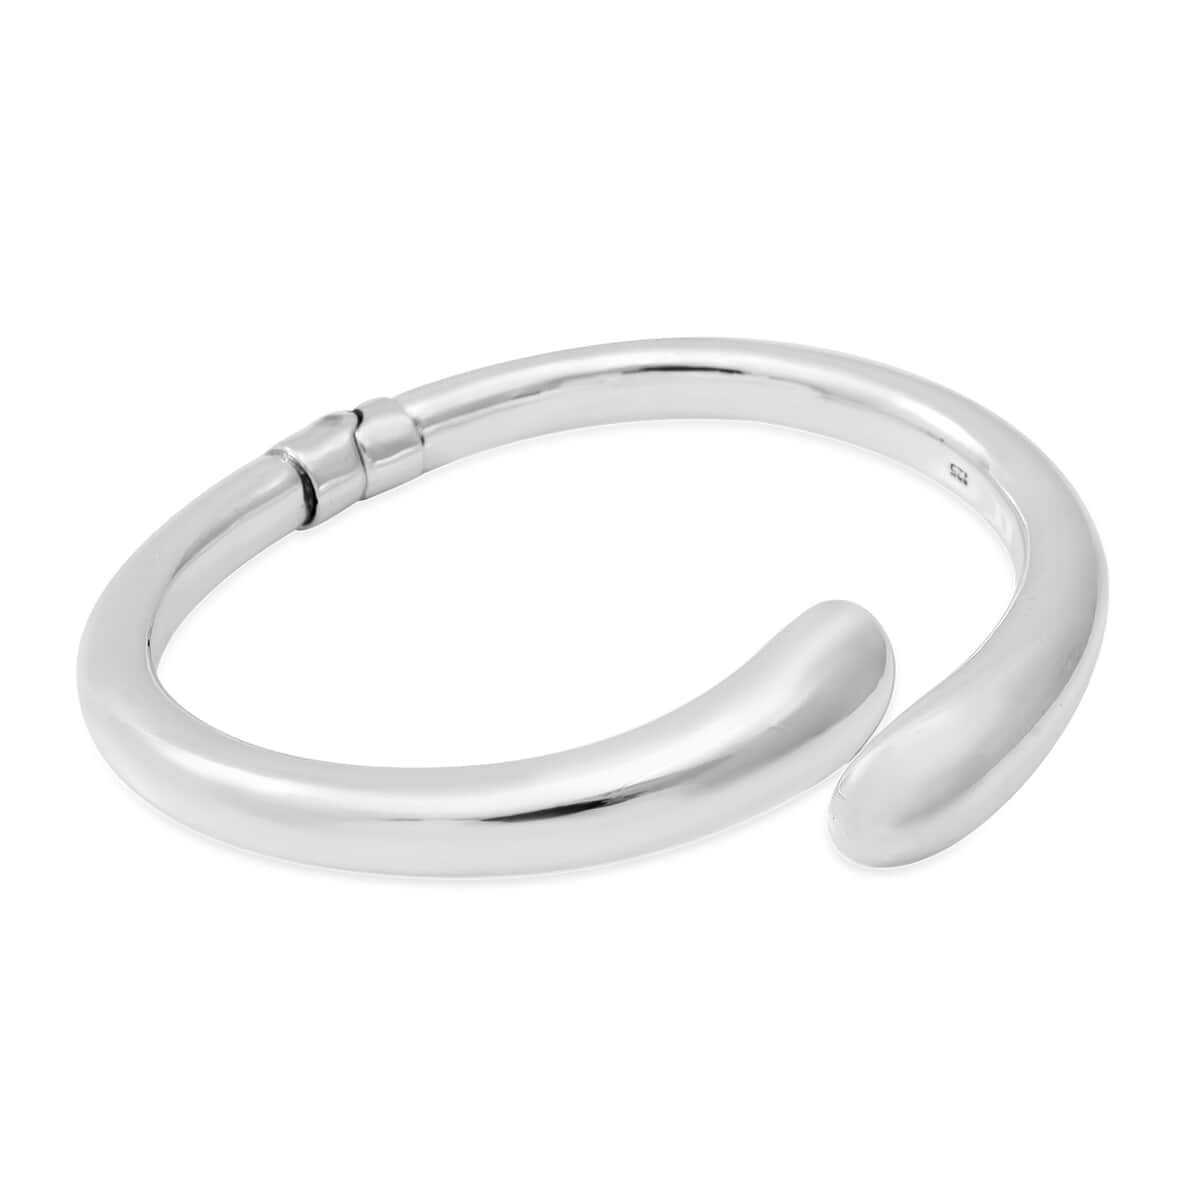 Designer Inspired Oversized Minimalist Sterling Silver Statement Bypass Cuff Bracelet (7 in) 11.55 Grams image number 1